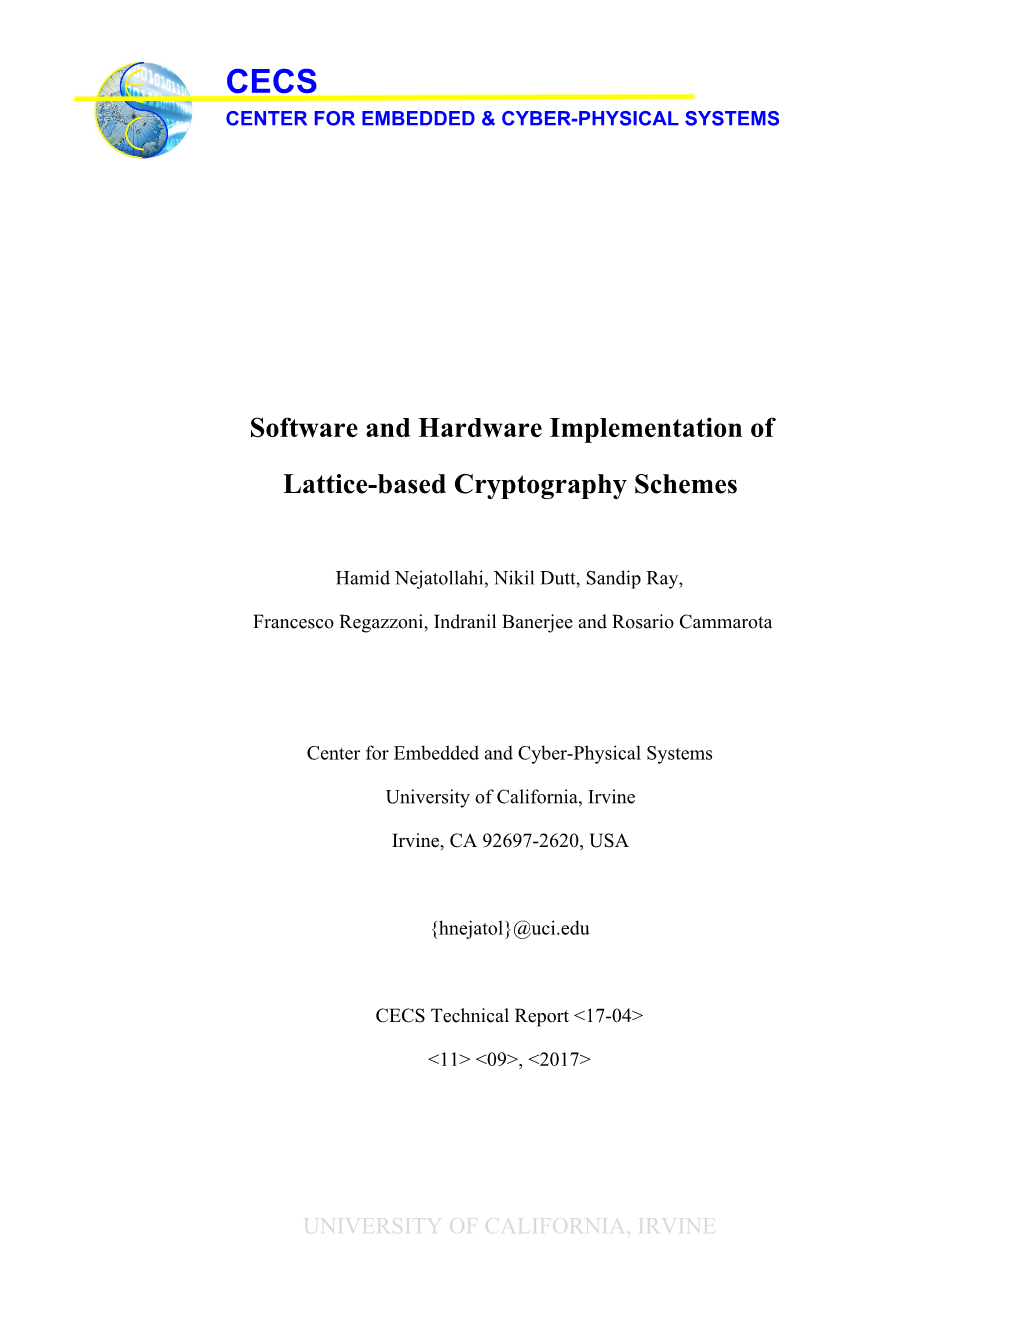 ​Software and Hardware Implementation of Lattice-Based Cryptography Schemes